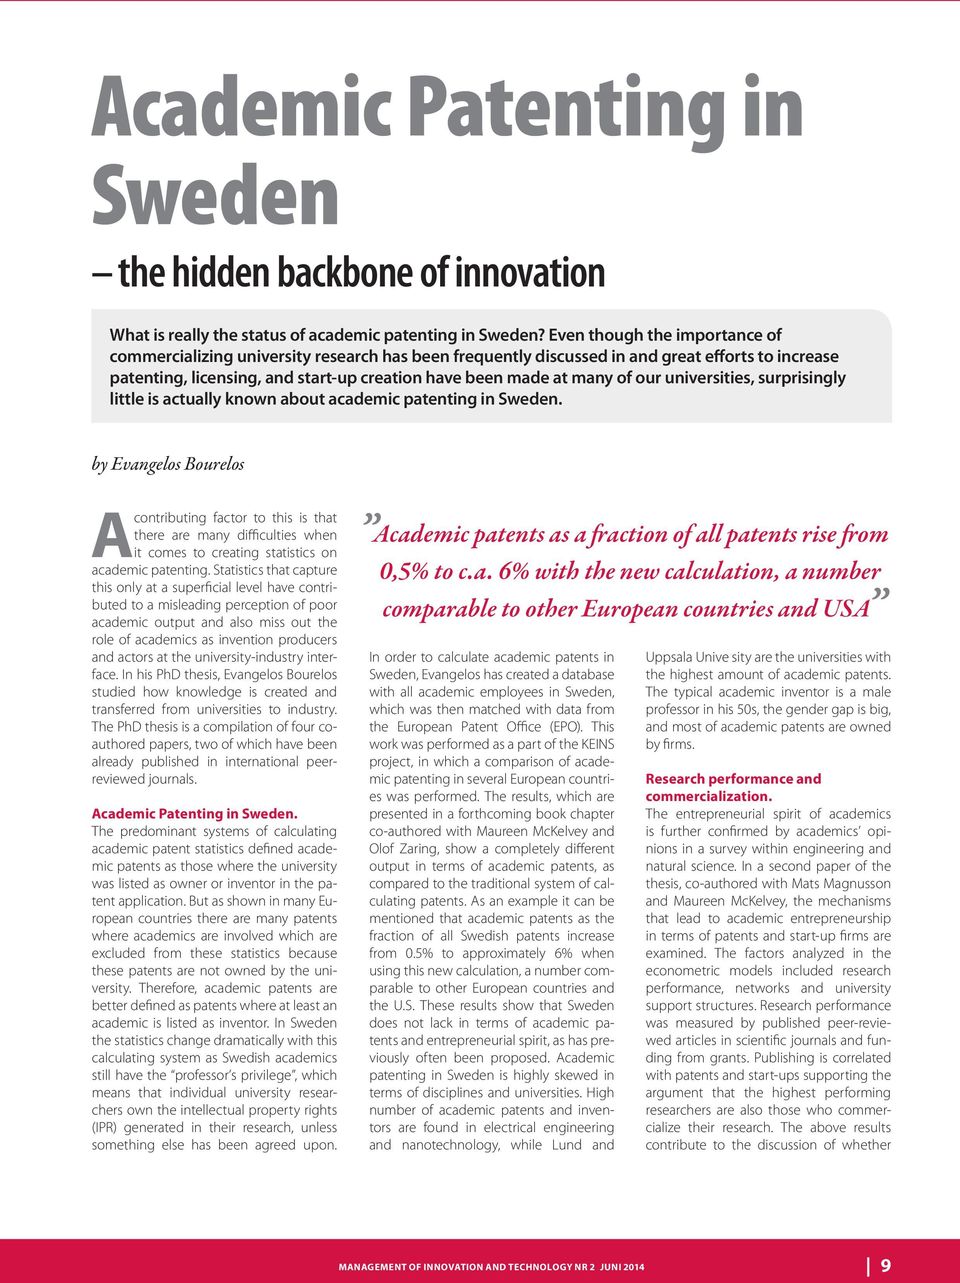 our universities, surprisingly little is actually known about academic patenting in Sweden.